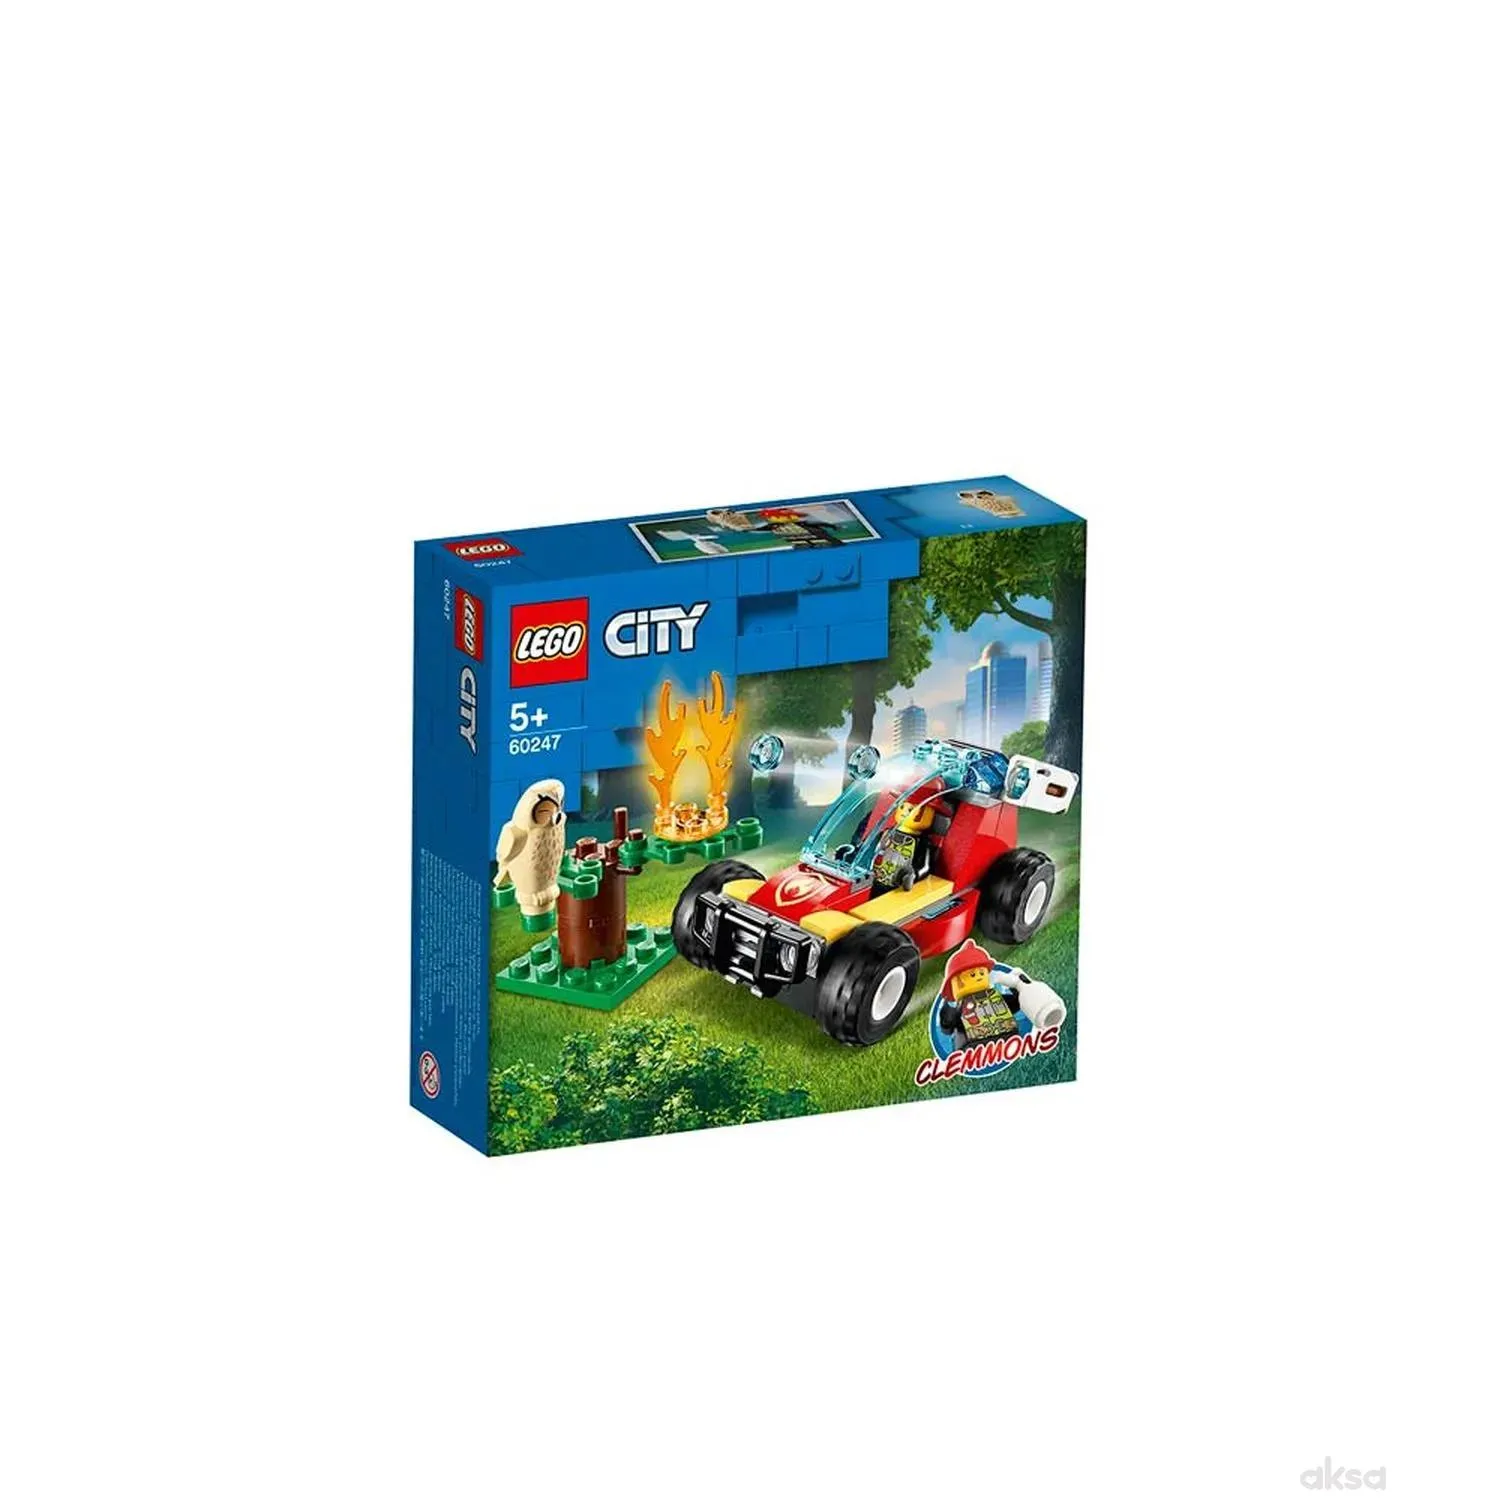 Lego City fores fire 